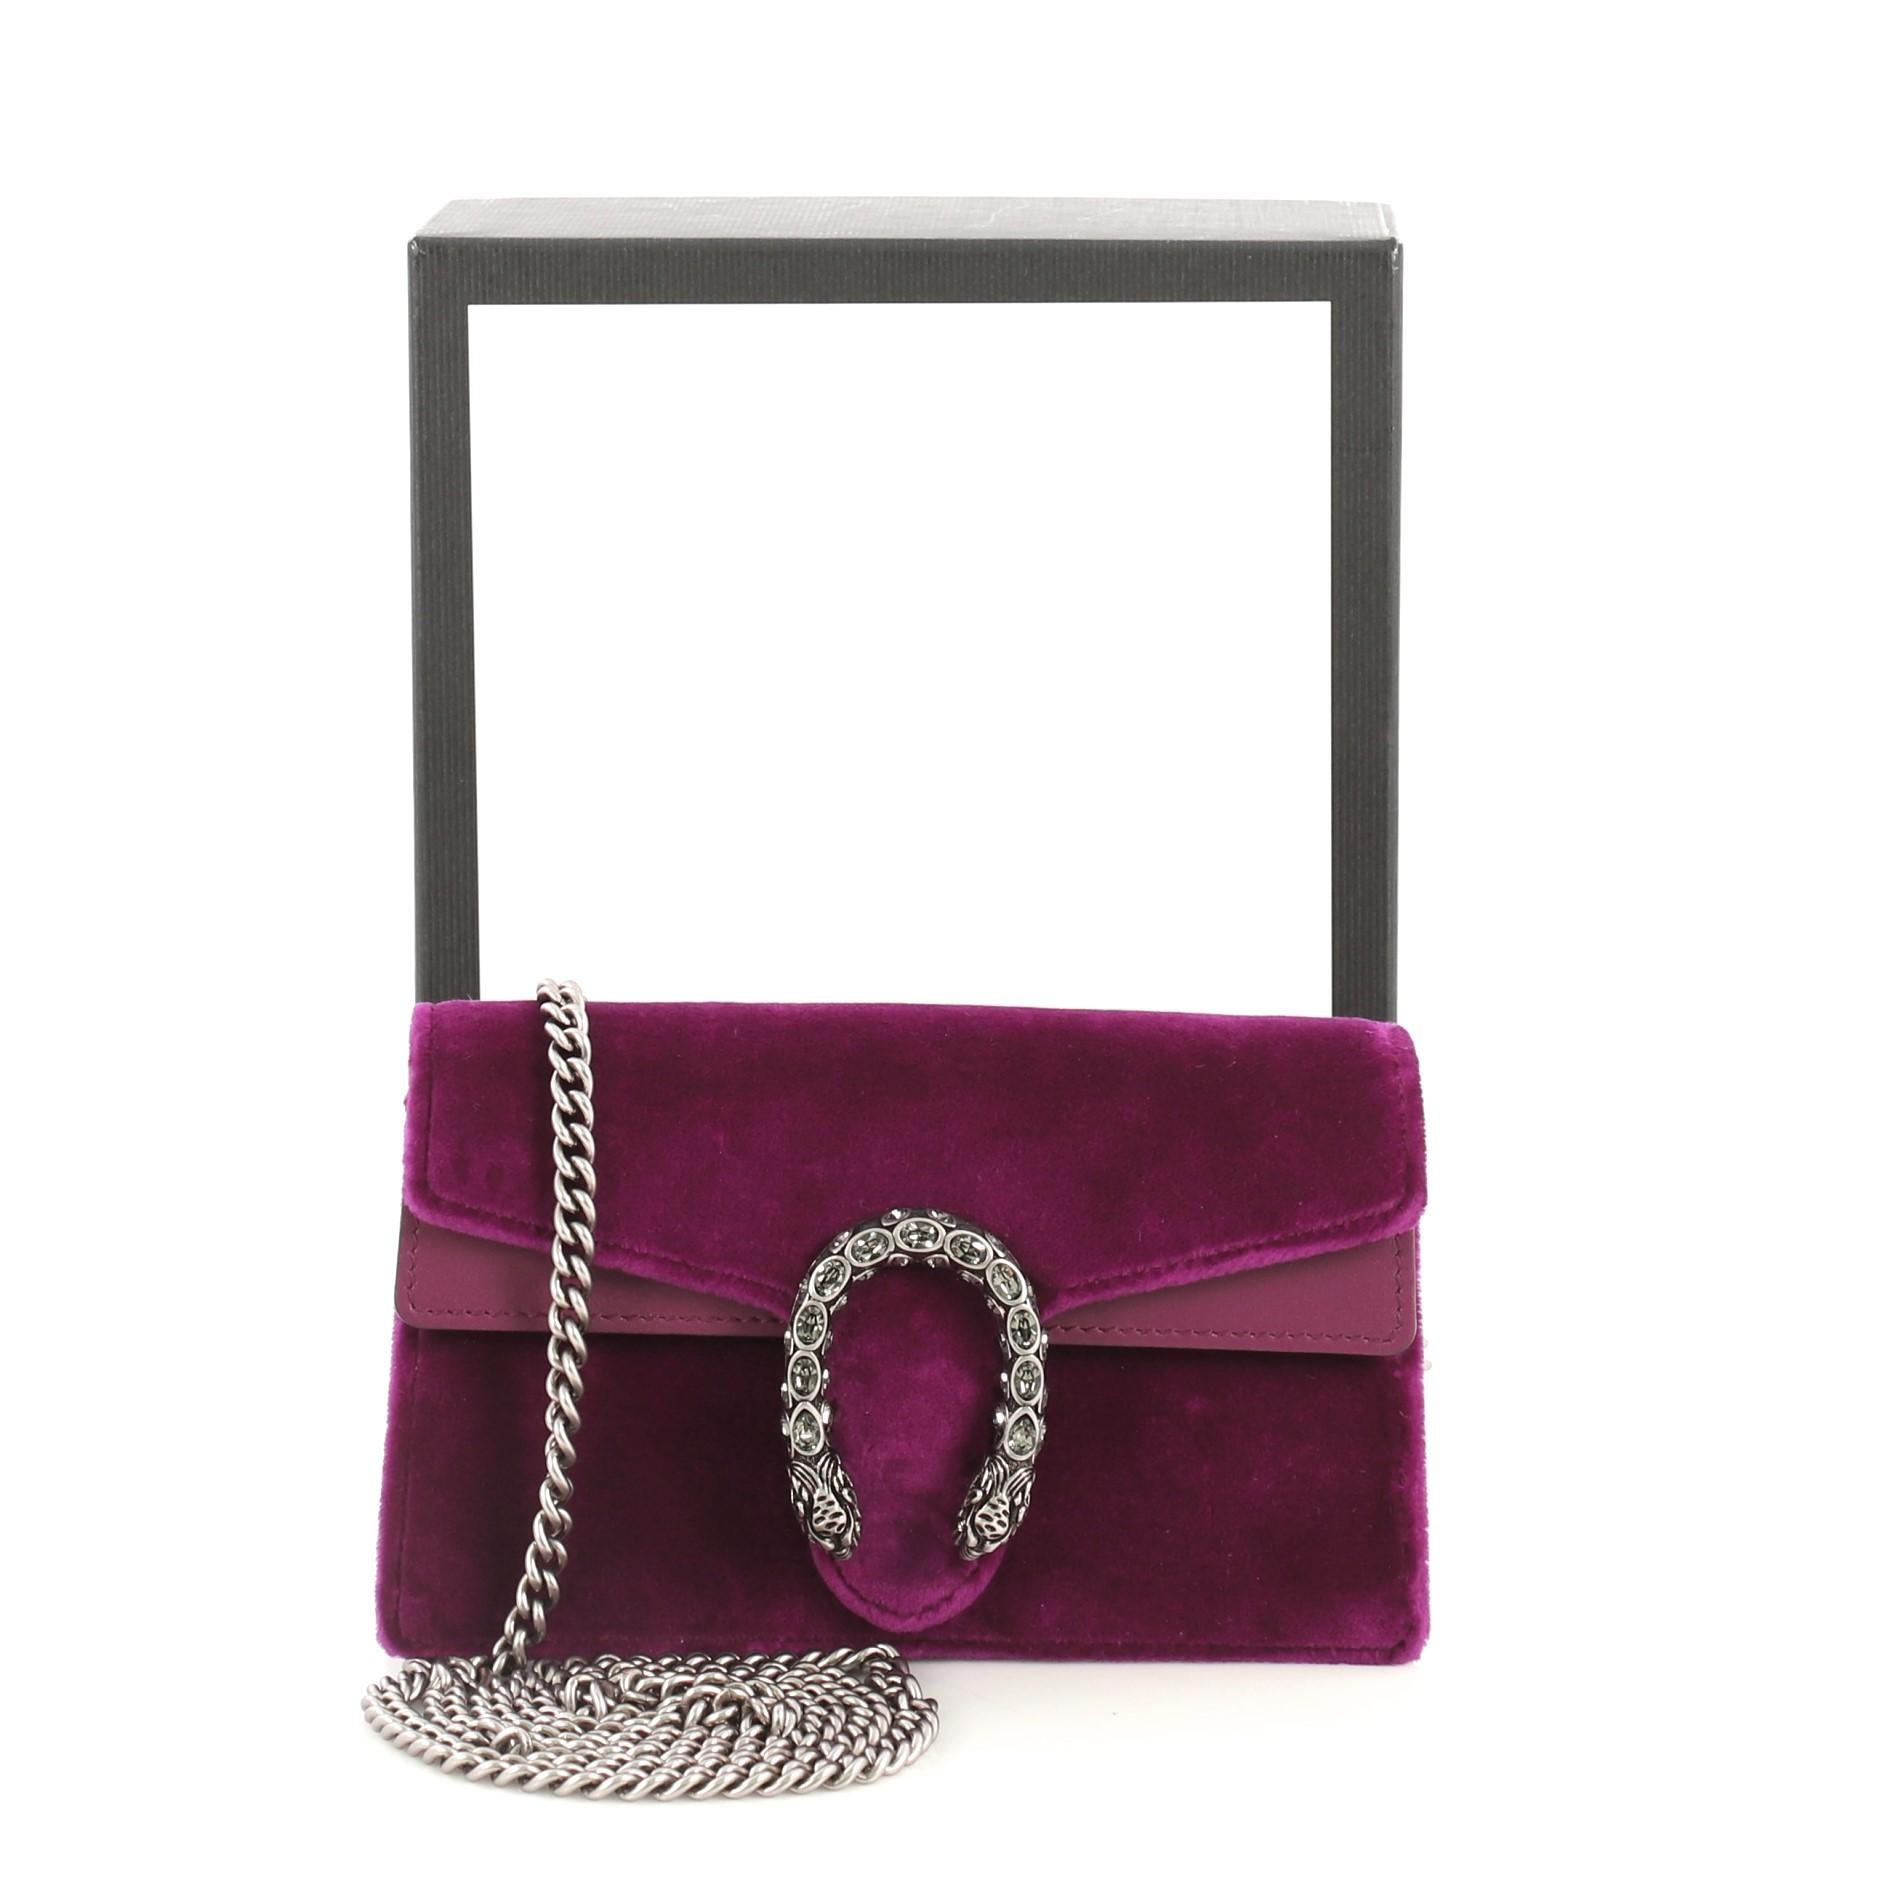 This Gucci Dionysus Bag Velvet Super Mini, crafted from purple velvet, features chain link strap, textured tiger head spur detail on its flap, and aged silver-tone hardware. Its hidden push-pin closure opens to a neutral microfiber interior.